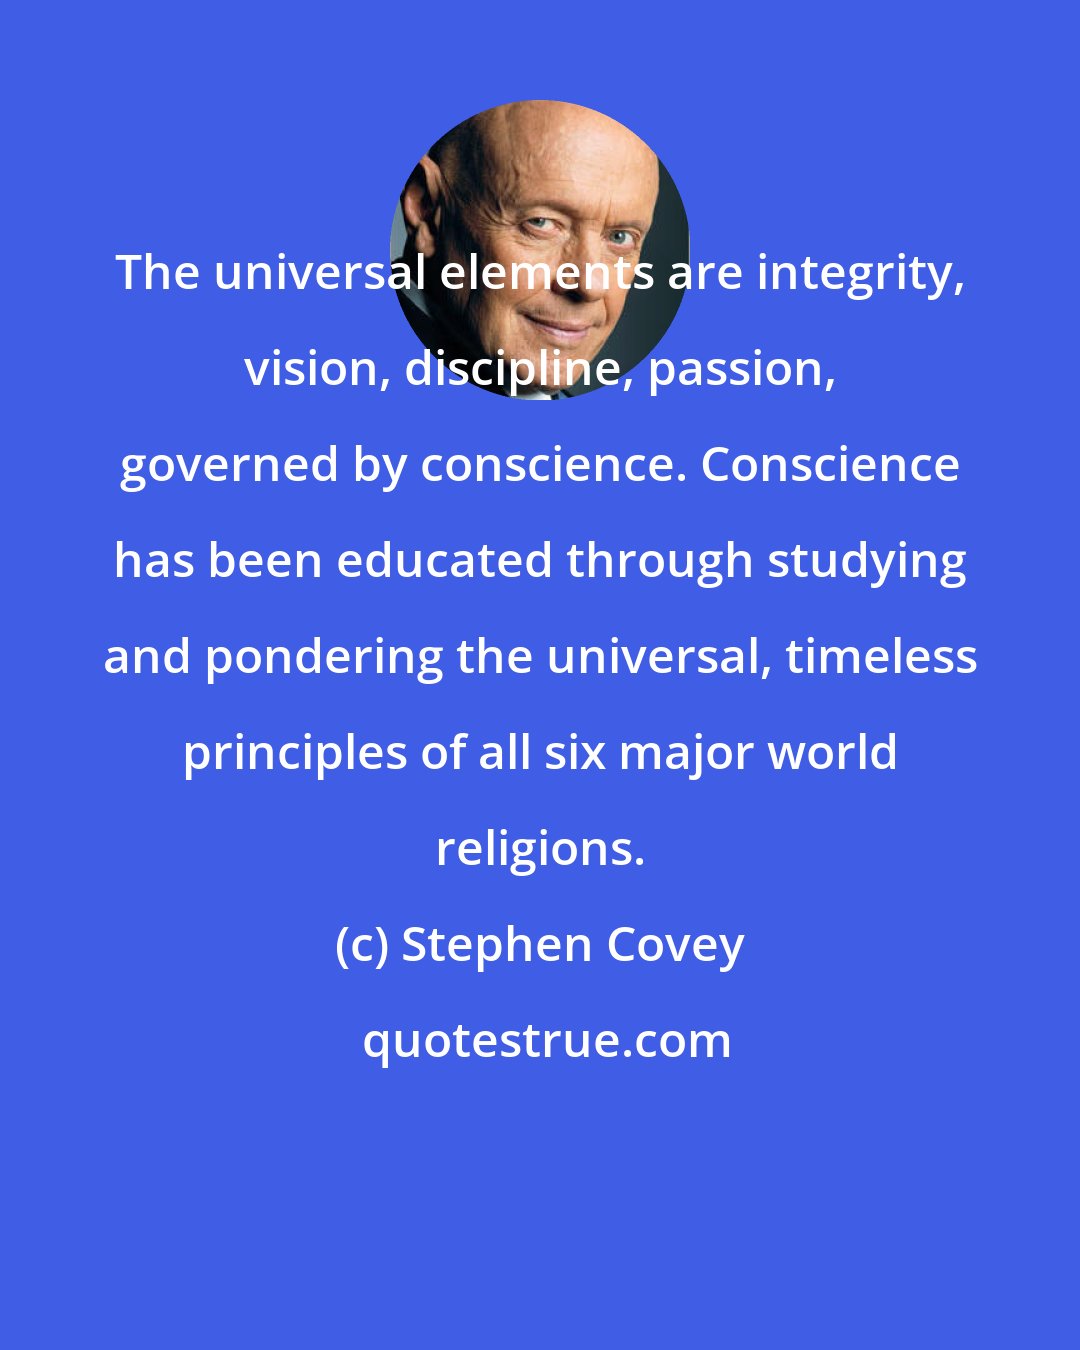 Stephen Covey: The universal elements are integrity, vision, discipline, passion, governed by conscience. Conscience has been educated through studying and pondering the universal, timeless principles of all six major world religions.